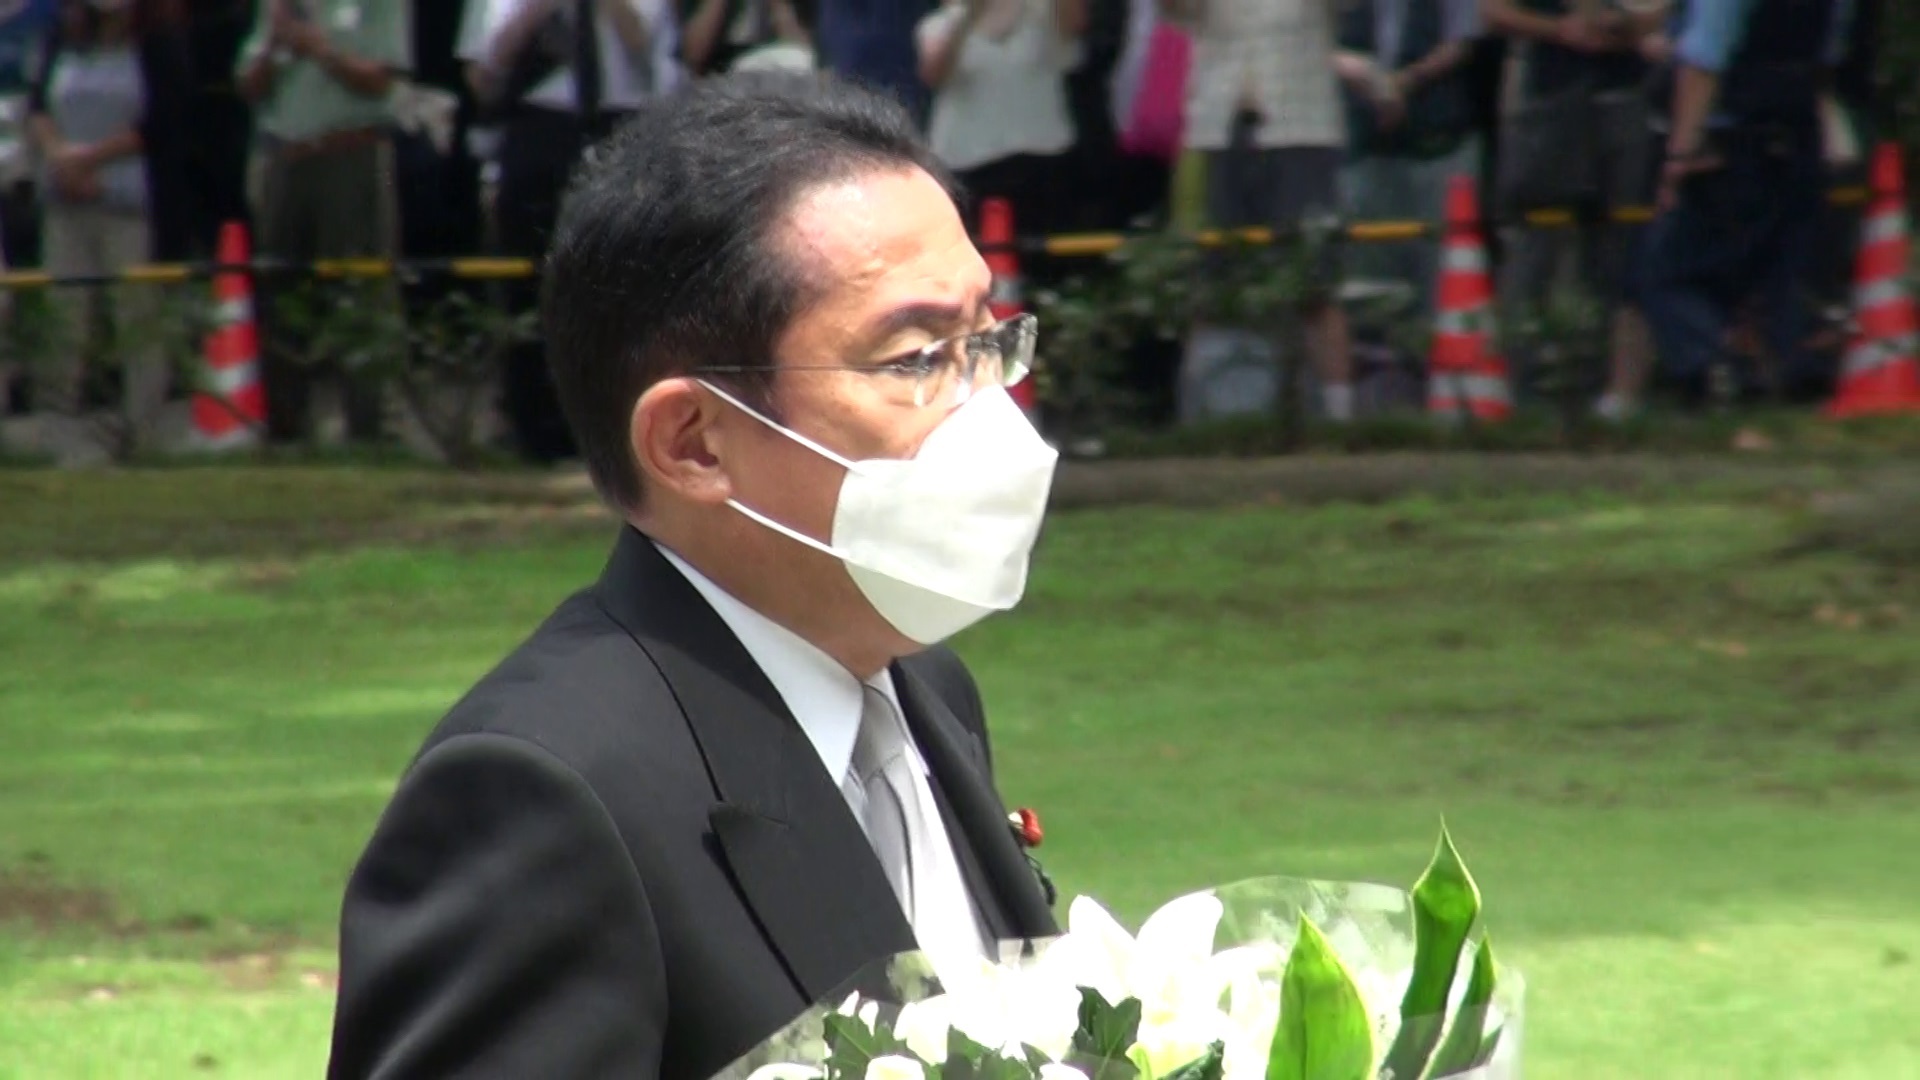 Photograph of the Prime Minister offering prayers at Chidorigafuchi National Cemetery (2)